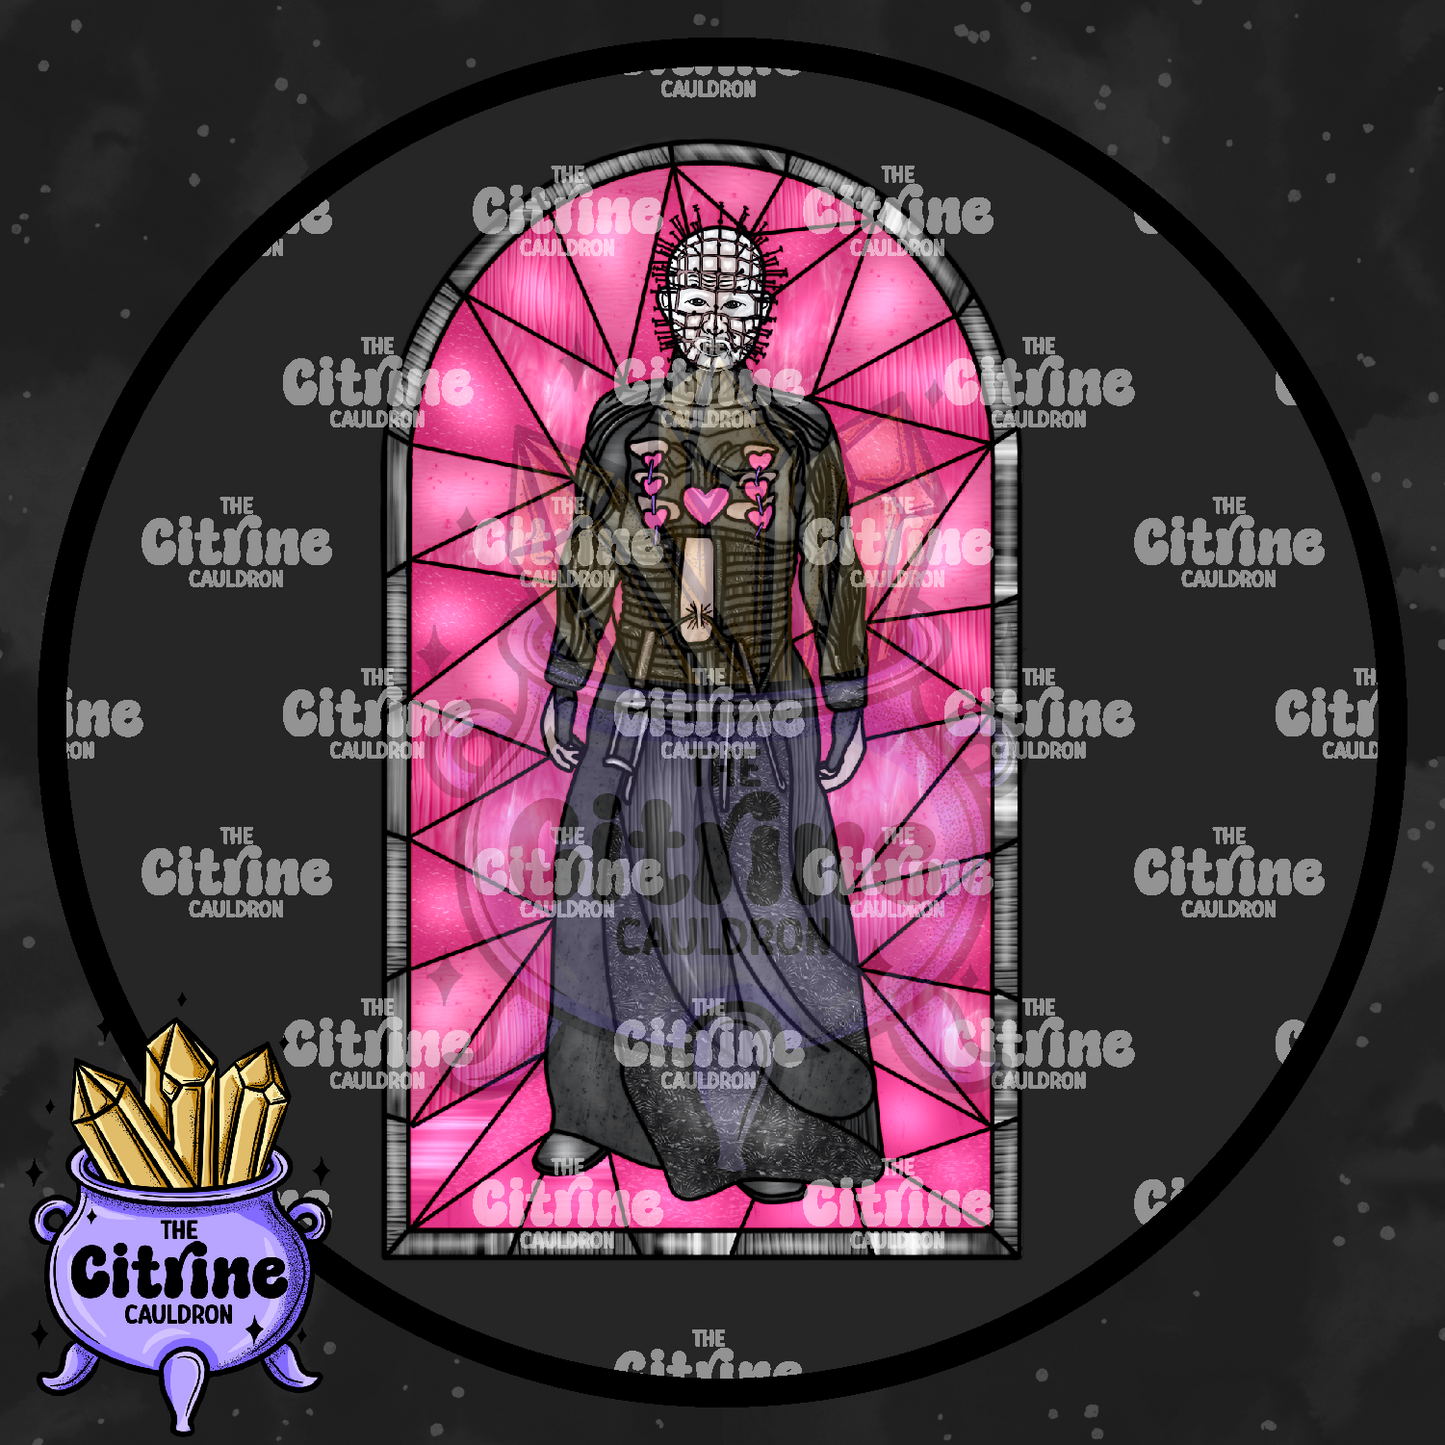 Horror Glass Pink - Sublimation PNG